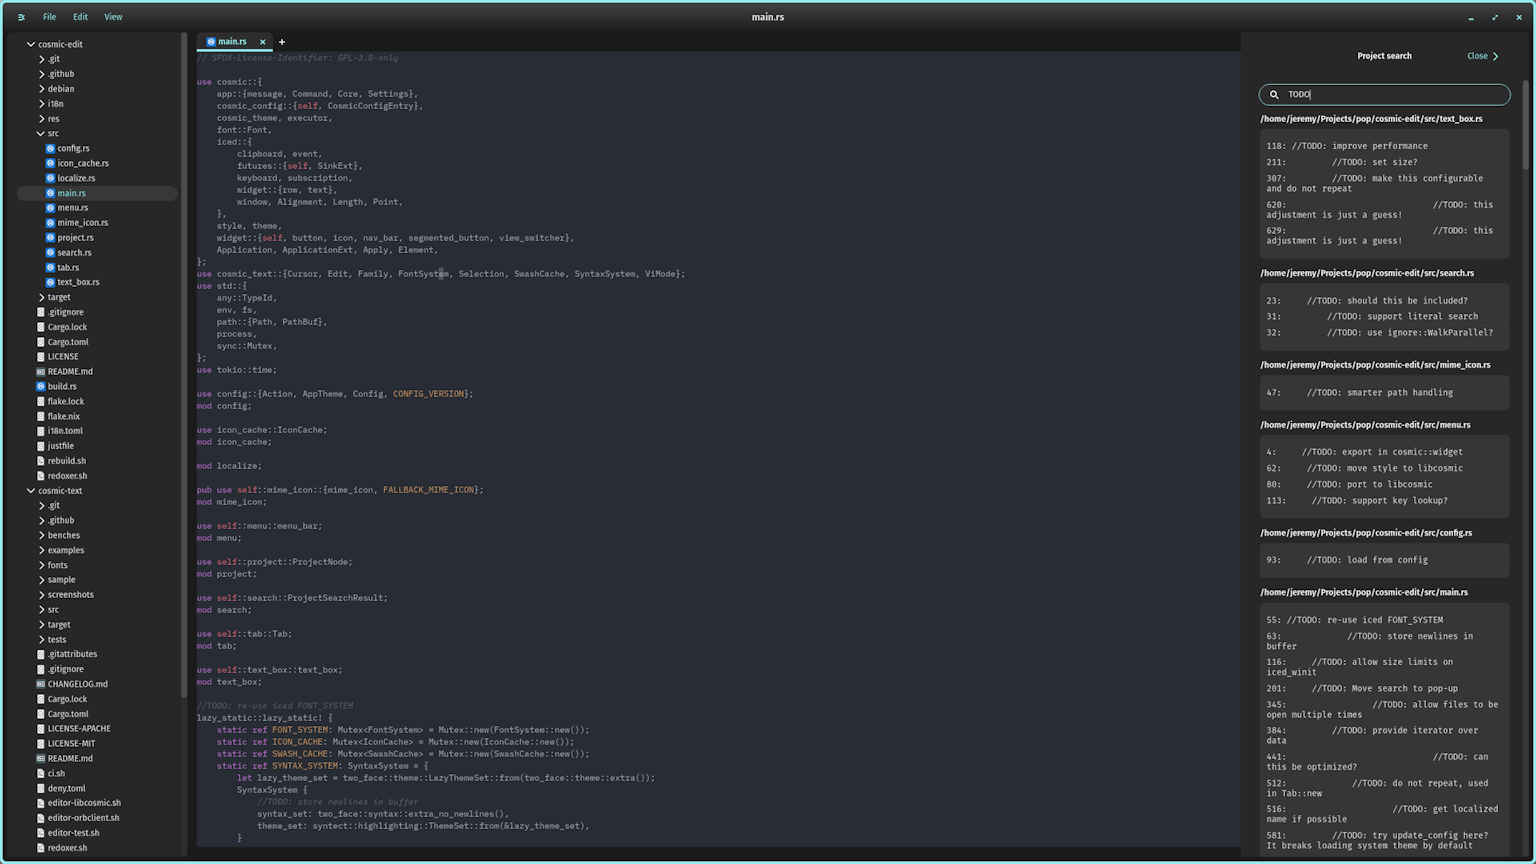 This screenshot of the COSMIC Text Editor shows someone searching their projects for “TODO”. The results show a list of TODO tasks for the text editor, as well as the file path where each are found.